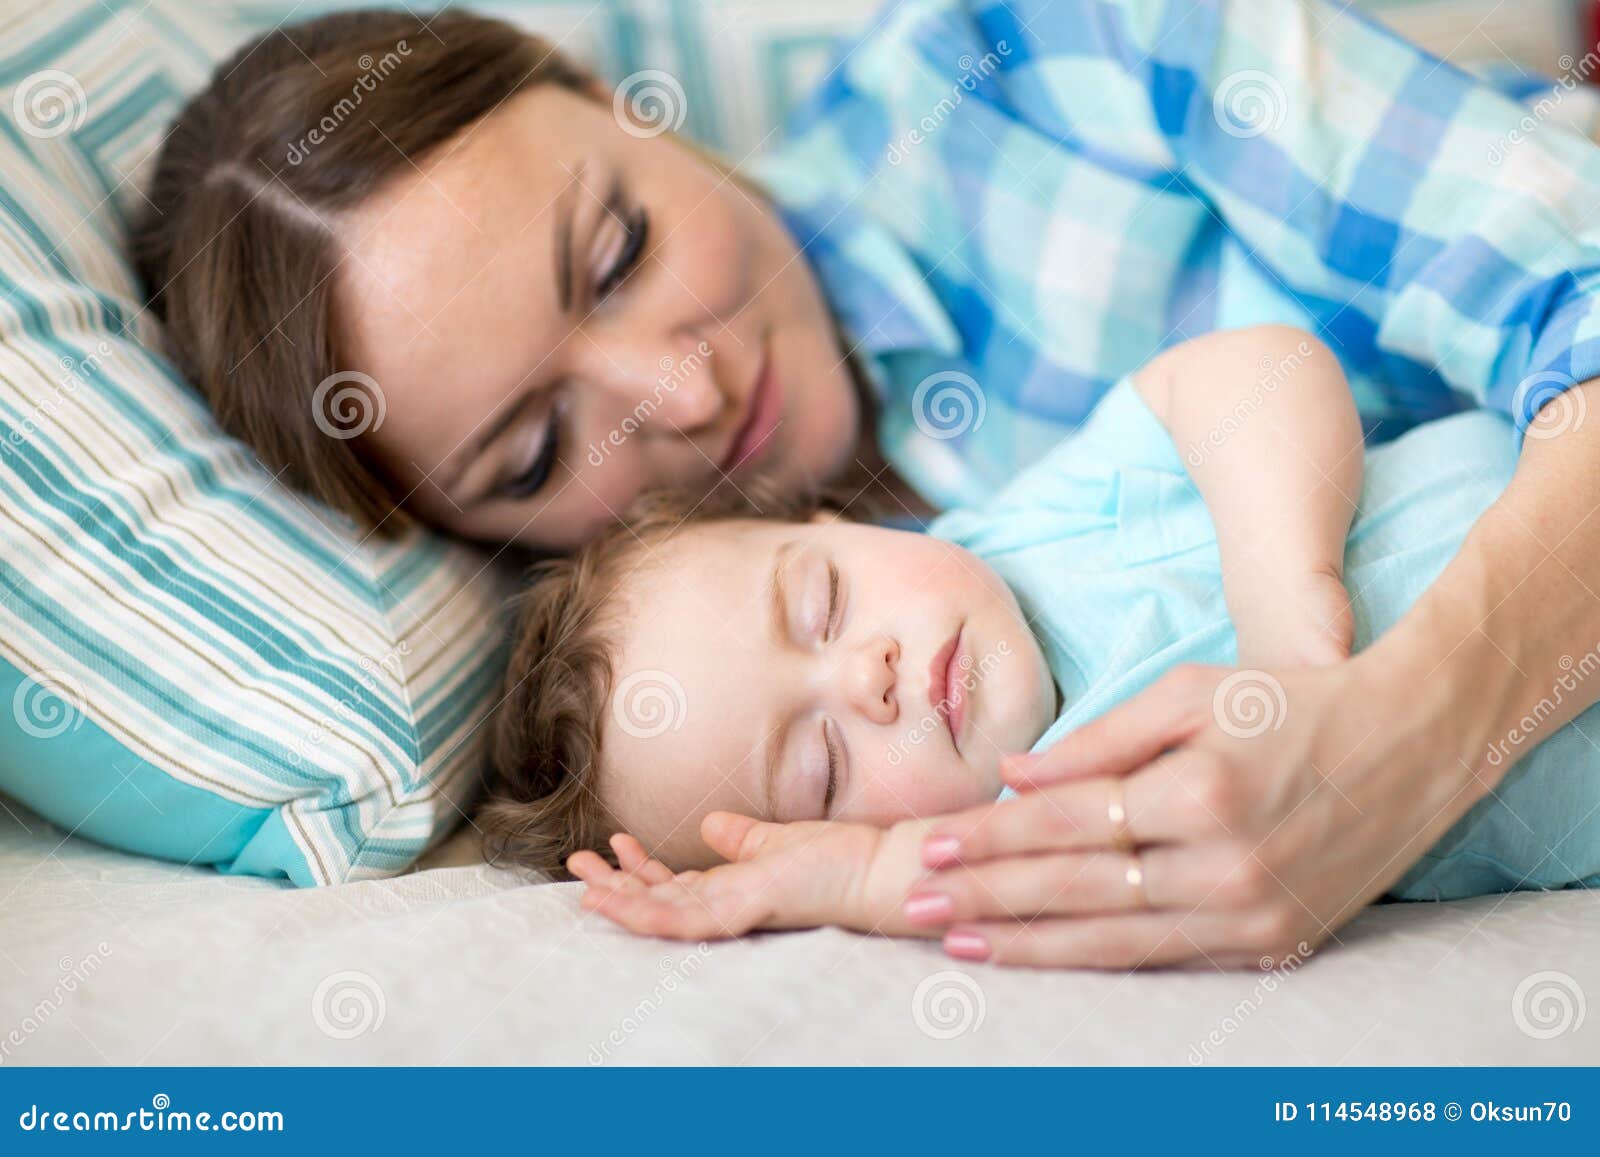 Mother And Her Son Baby Sleeping Together In A Bedroom Stock Photo